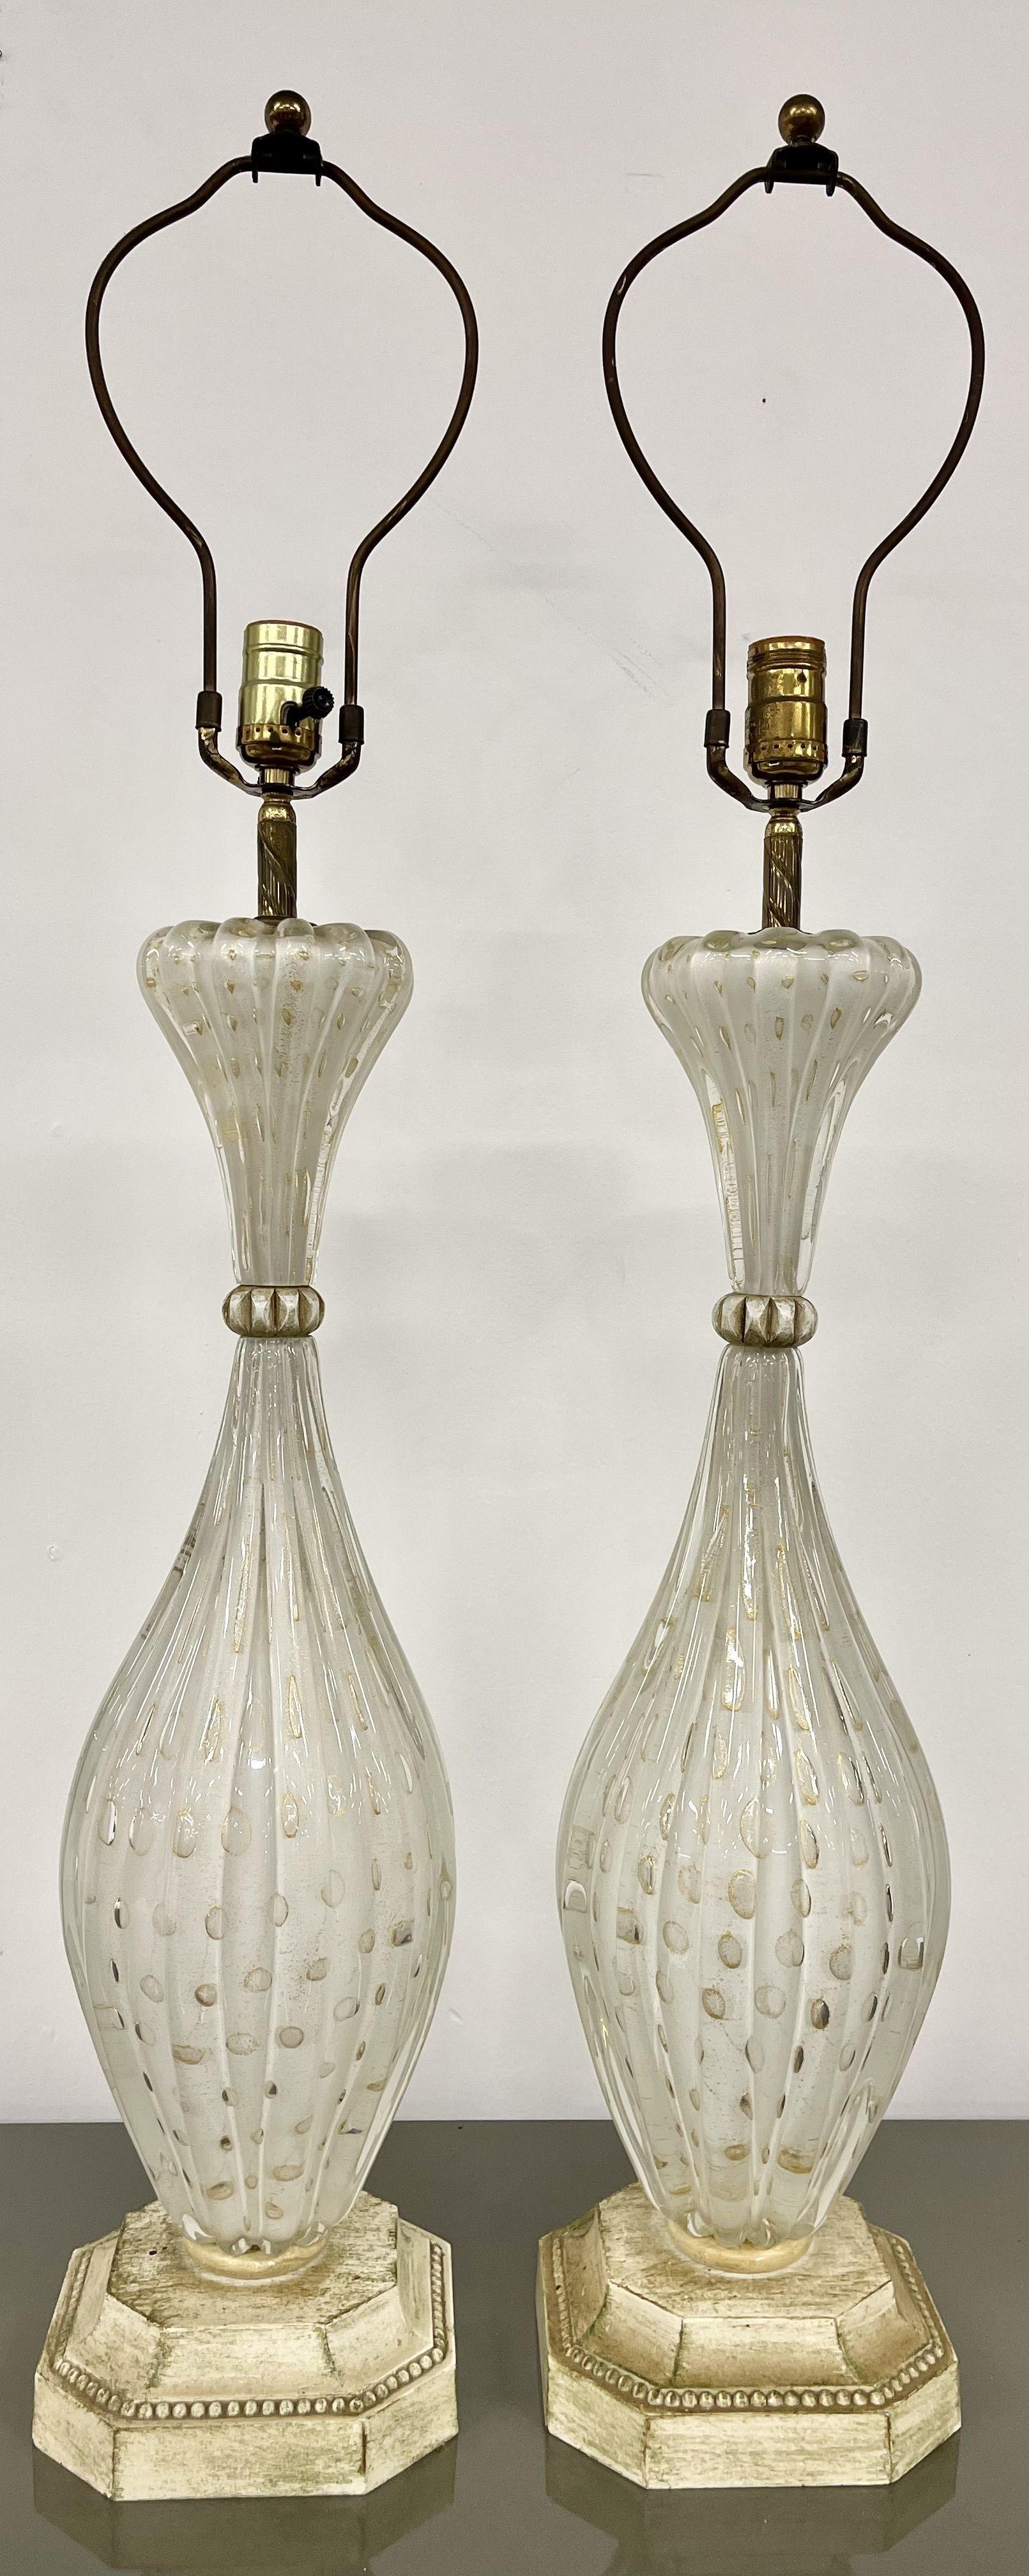 20th Century Pair of Murano Glass Speckle Table Lamps, Mid Century Modern